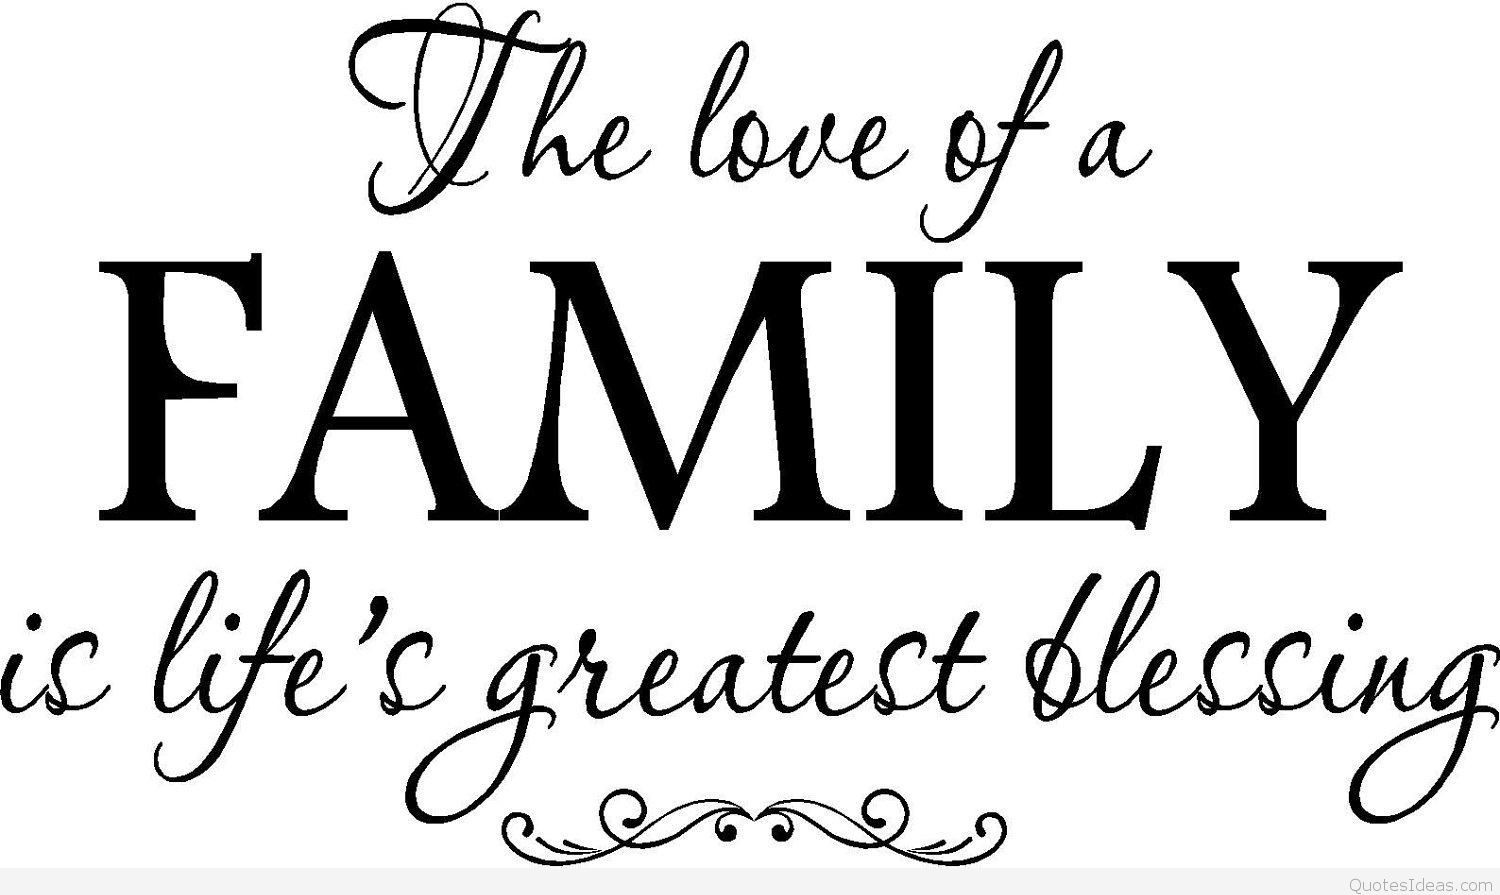 Family Image Quotes
 Family wallpaper quote HD wish